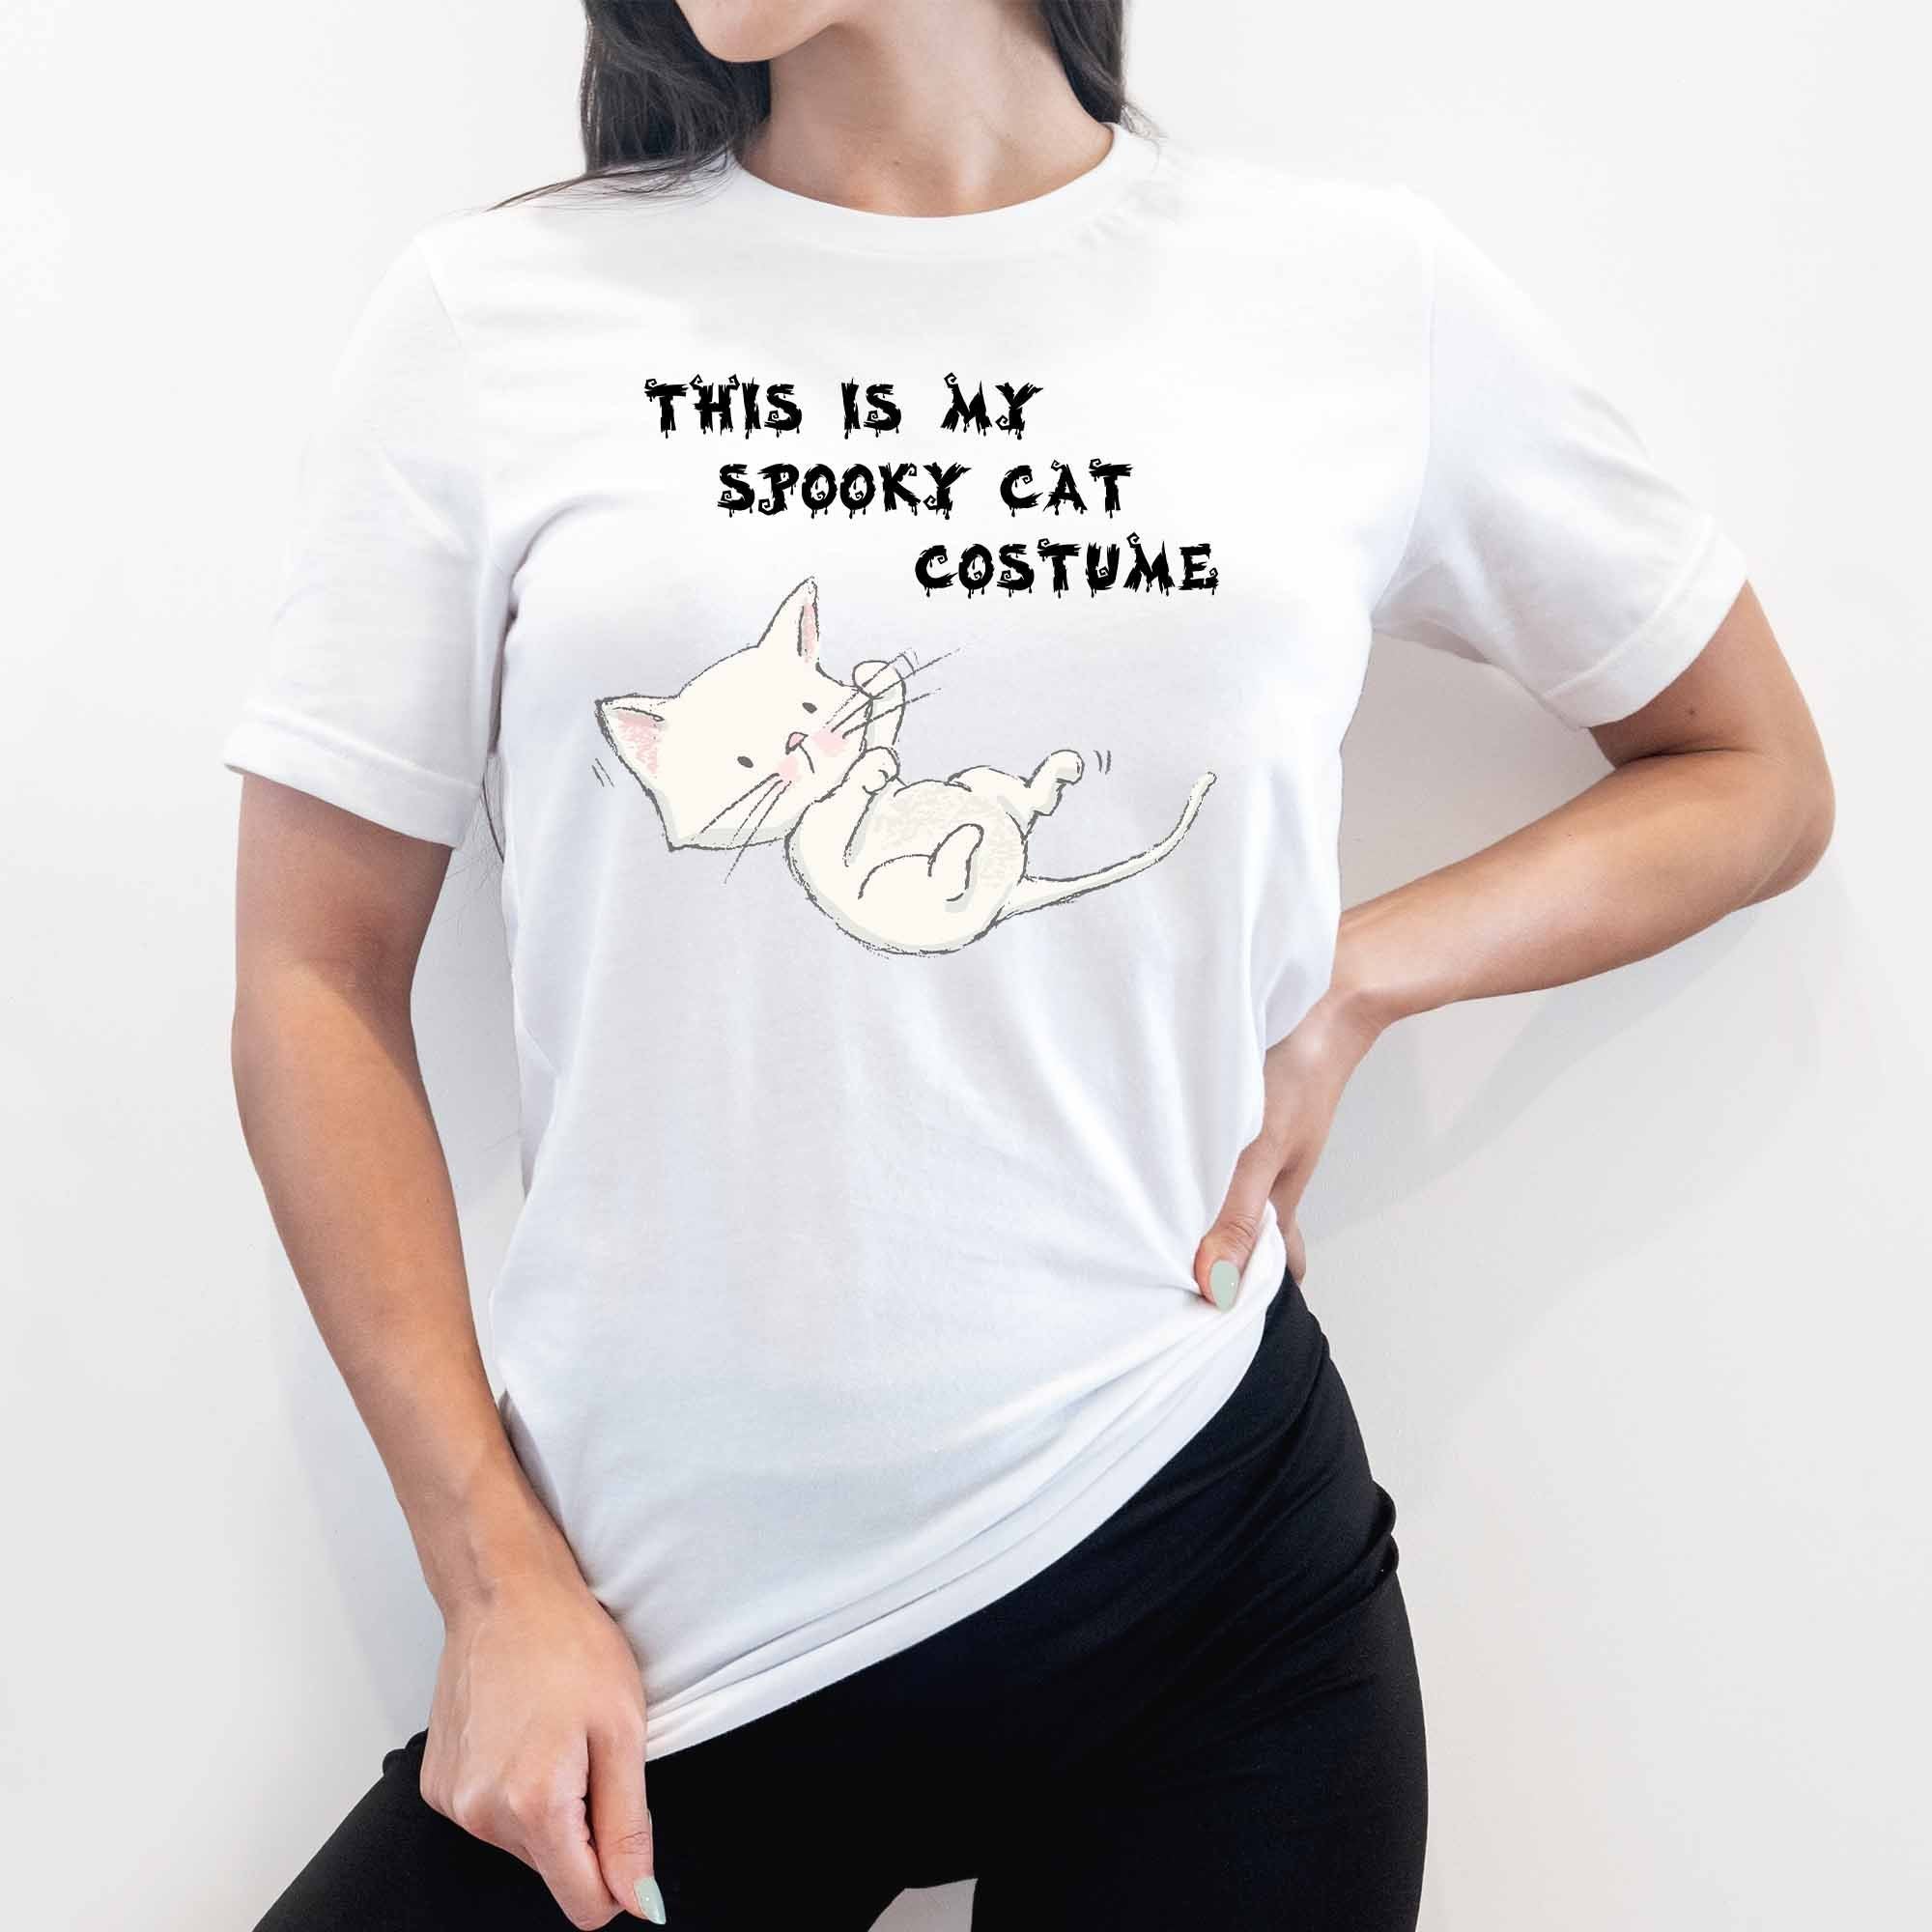 This Is My Spooky Cat Costume Graphic Tee - My Custom Tee Party